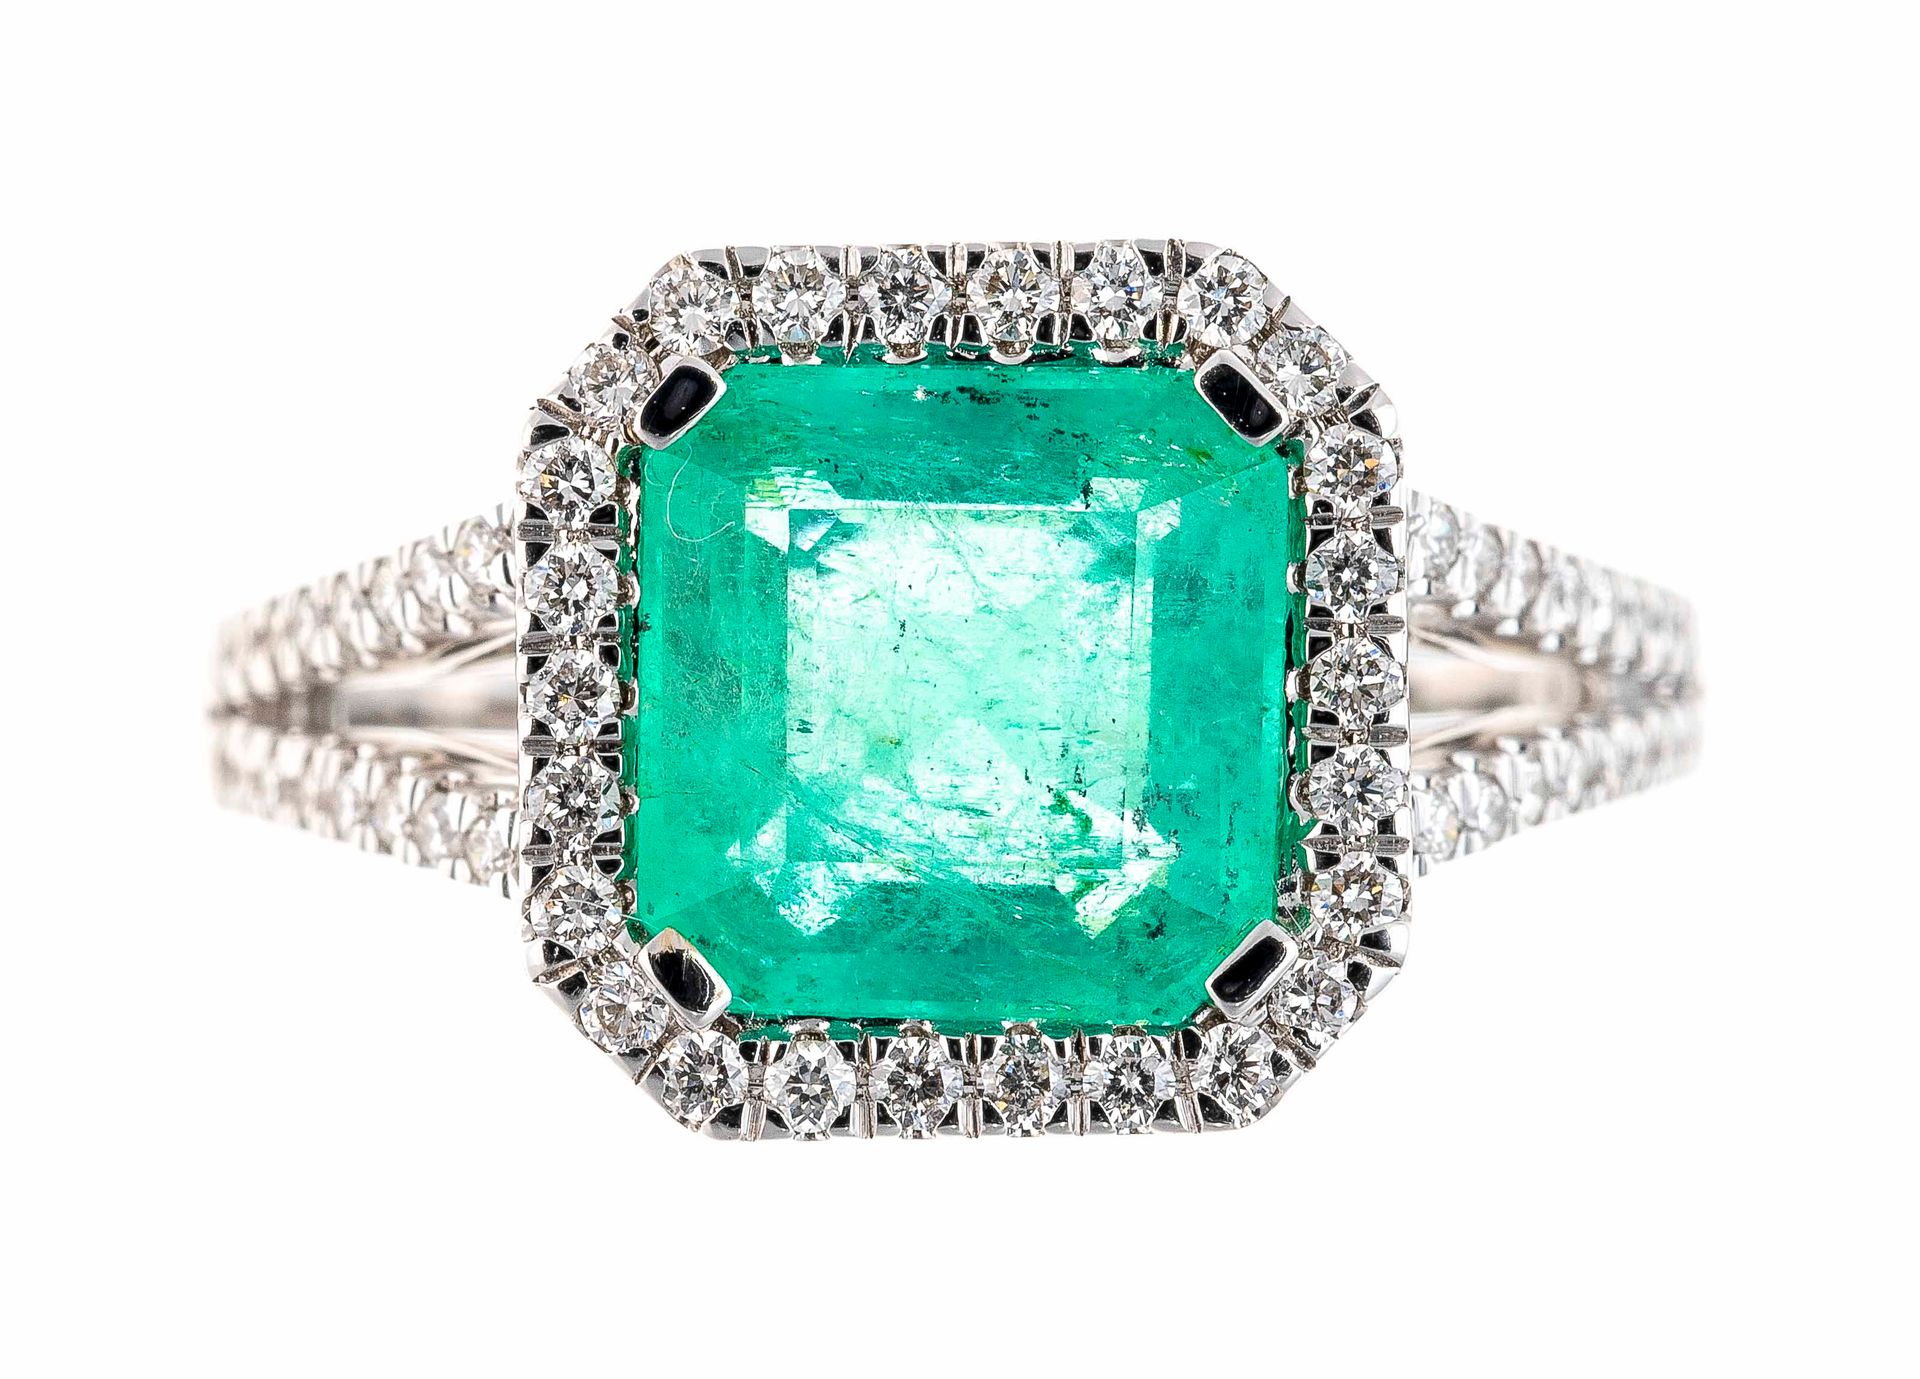 Null White gold ring centered on a 1.9 carat rectangular cut emerald in a diamon&hellip;